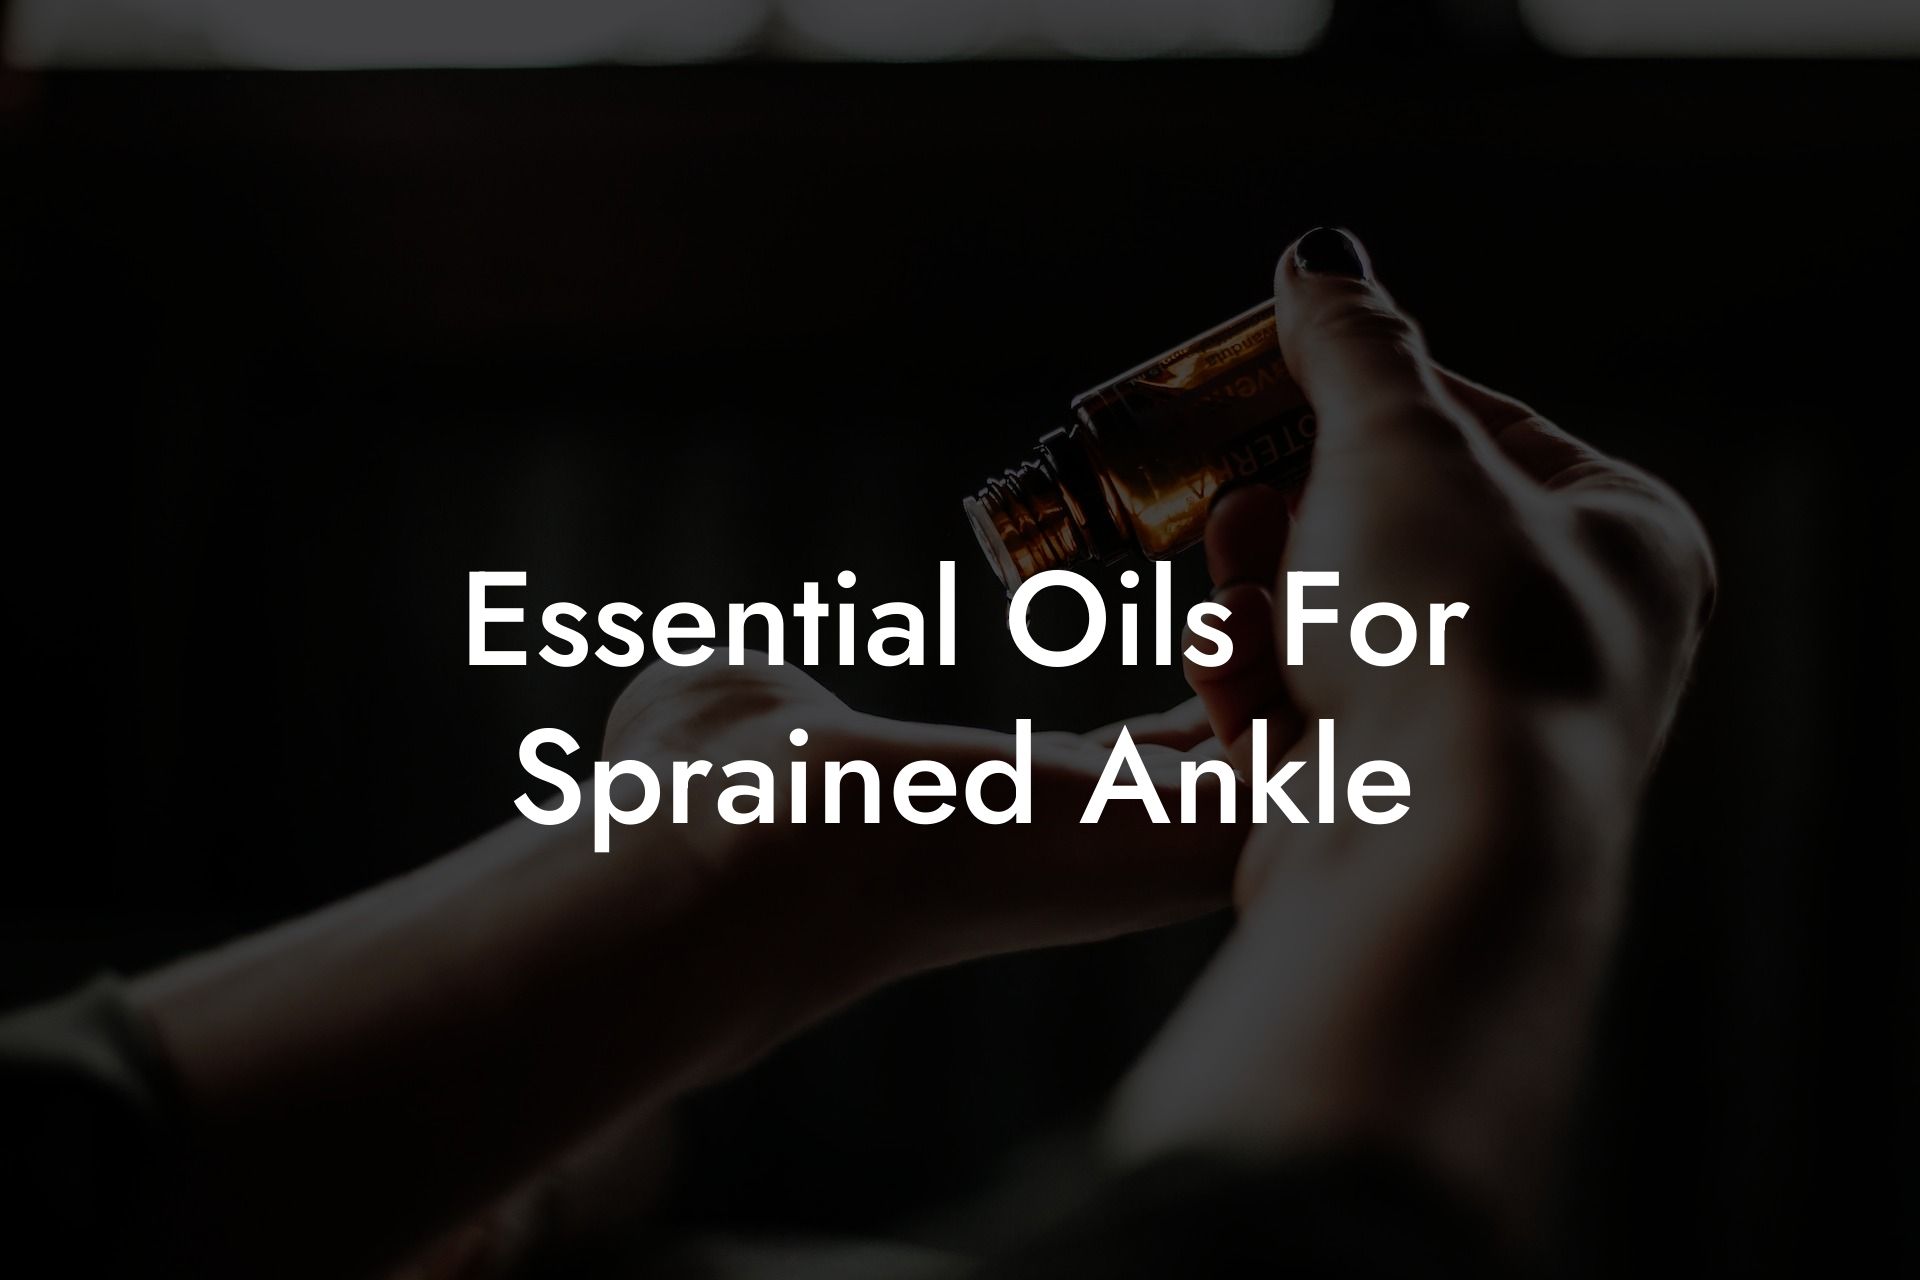 Essential Oils For Sprained Ankle